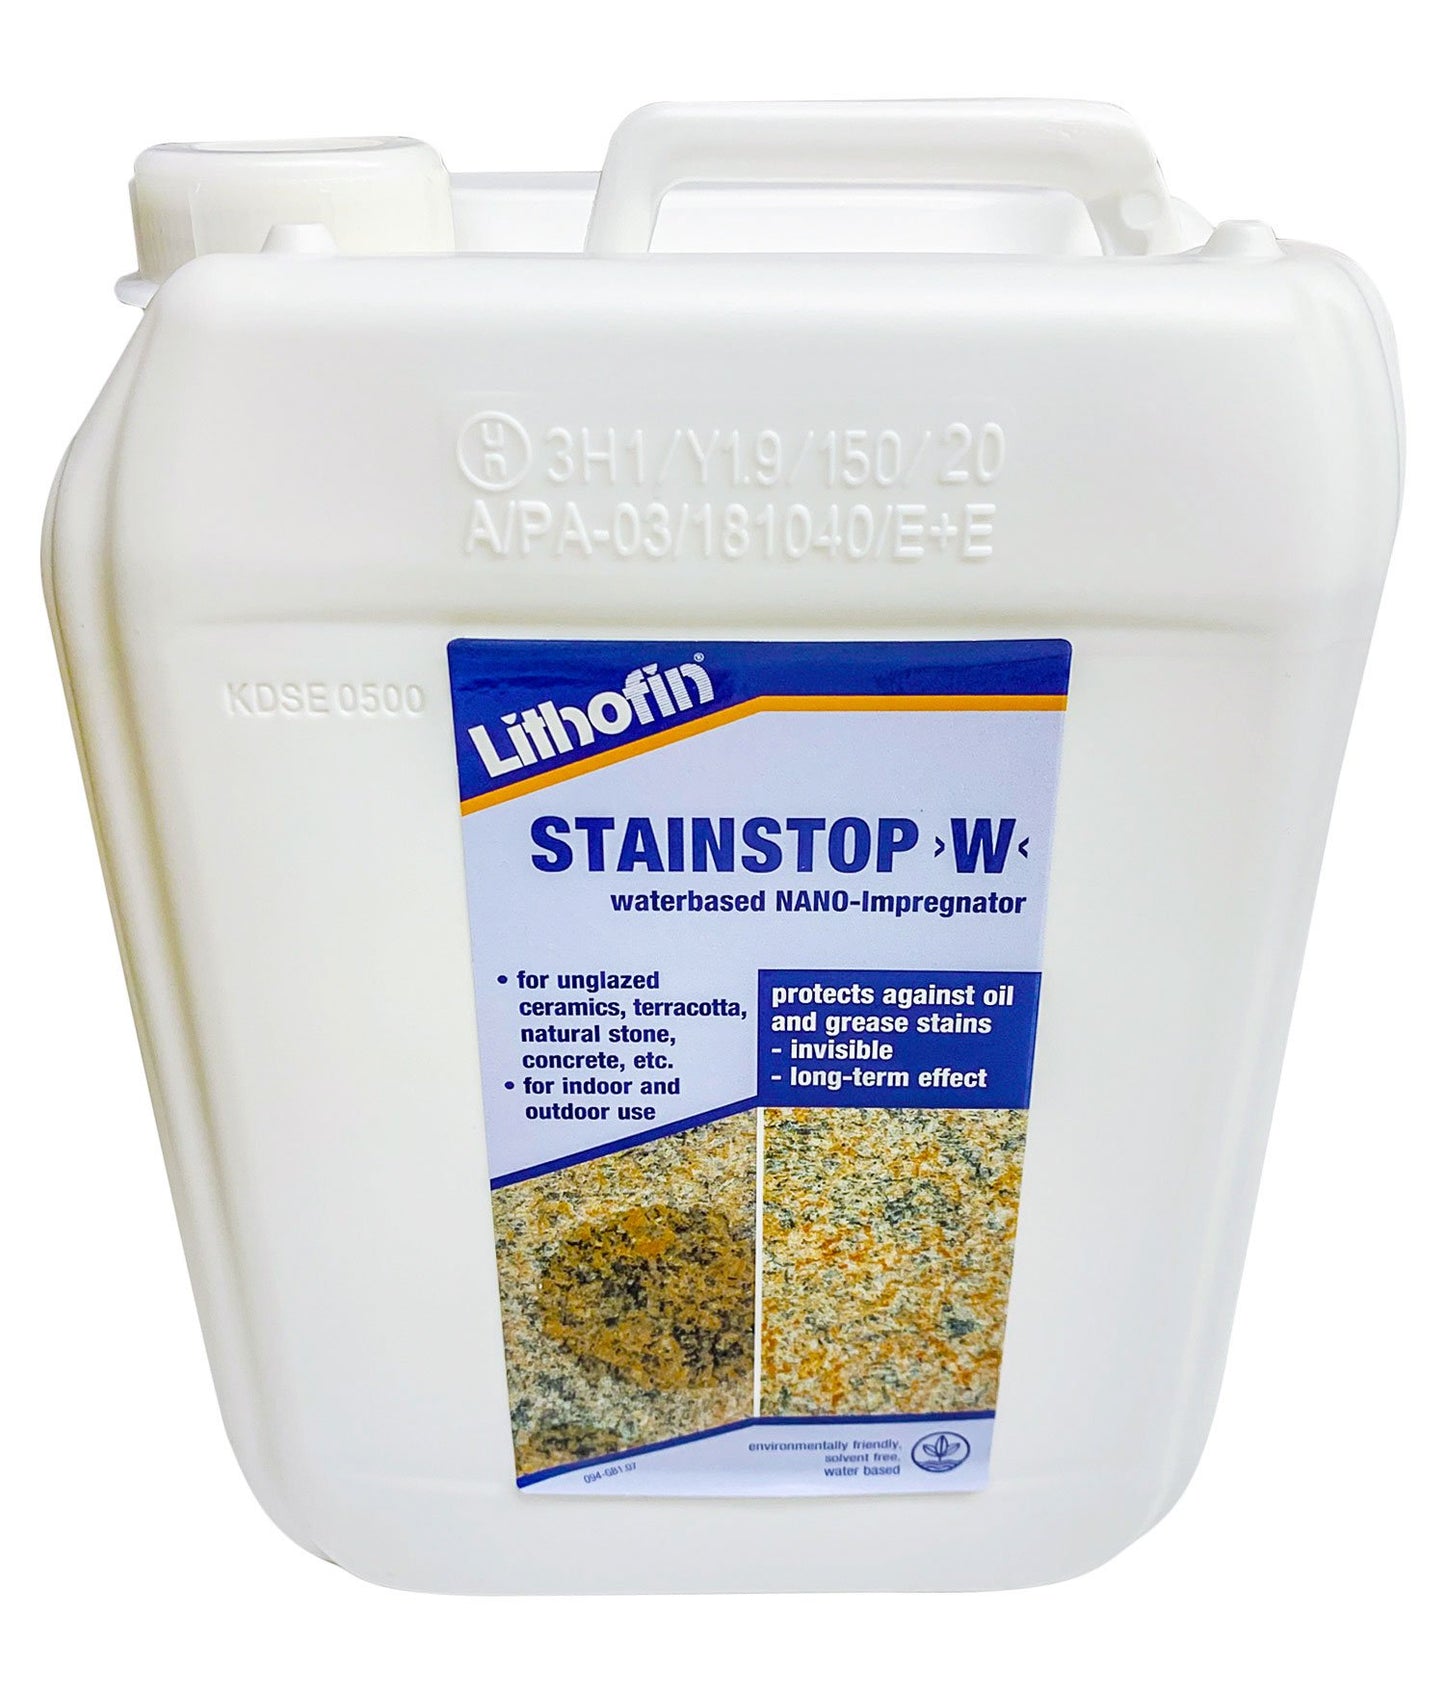 Lithofin Stainstop W